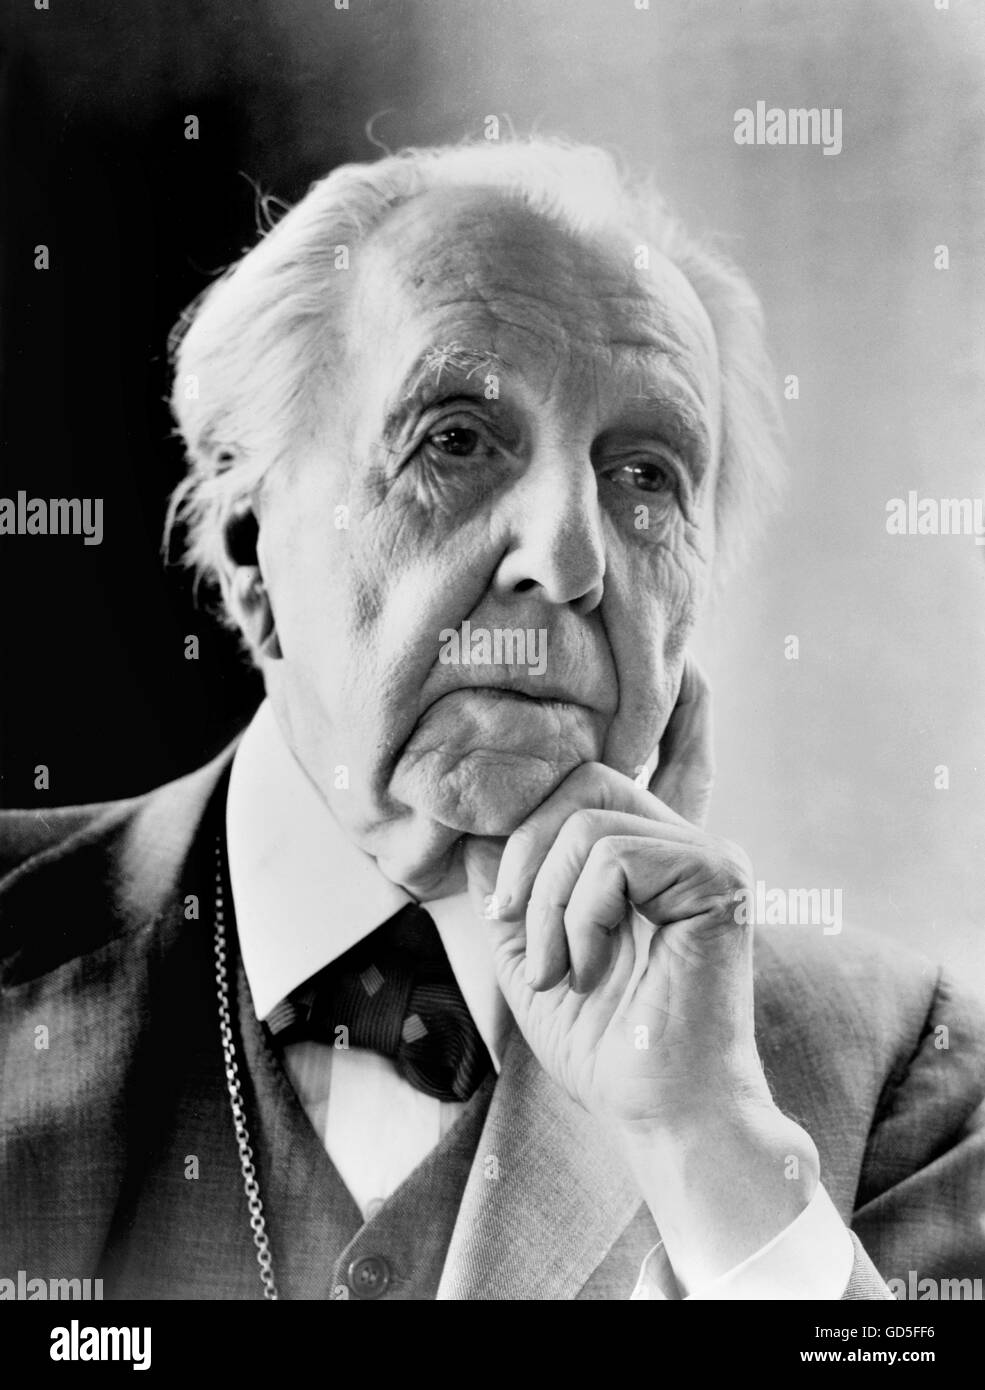 Frank Lloyd Wright. Portrait of the renowned American architect by Al Ravenna, 1954. Stock Photo